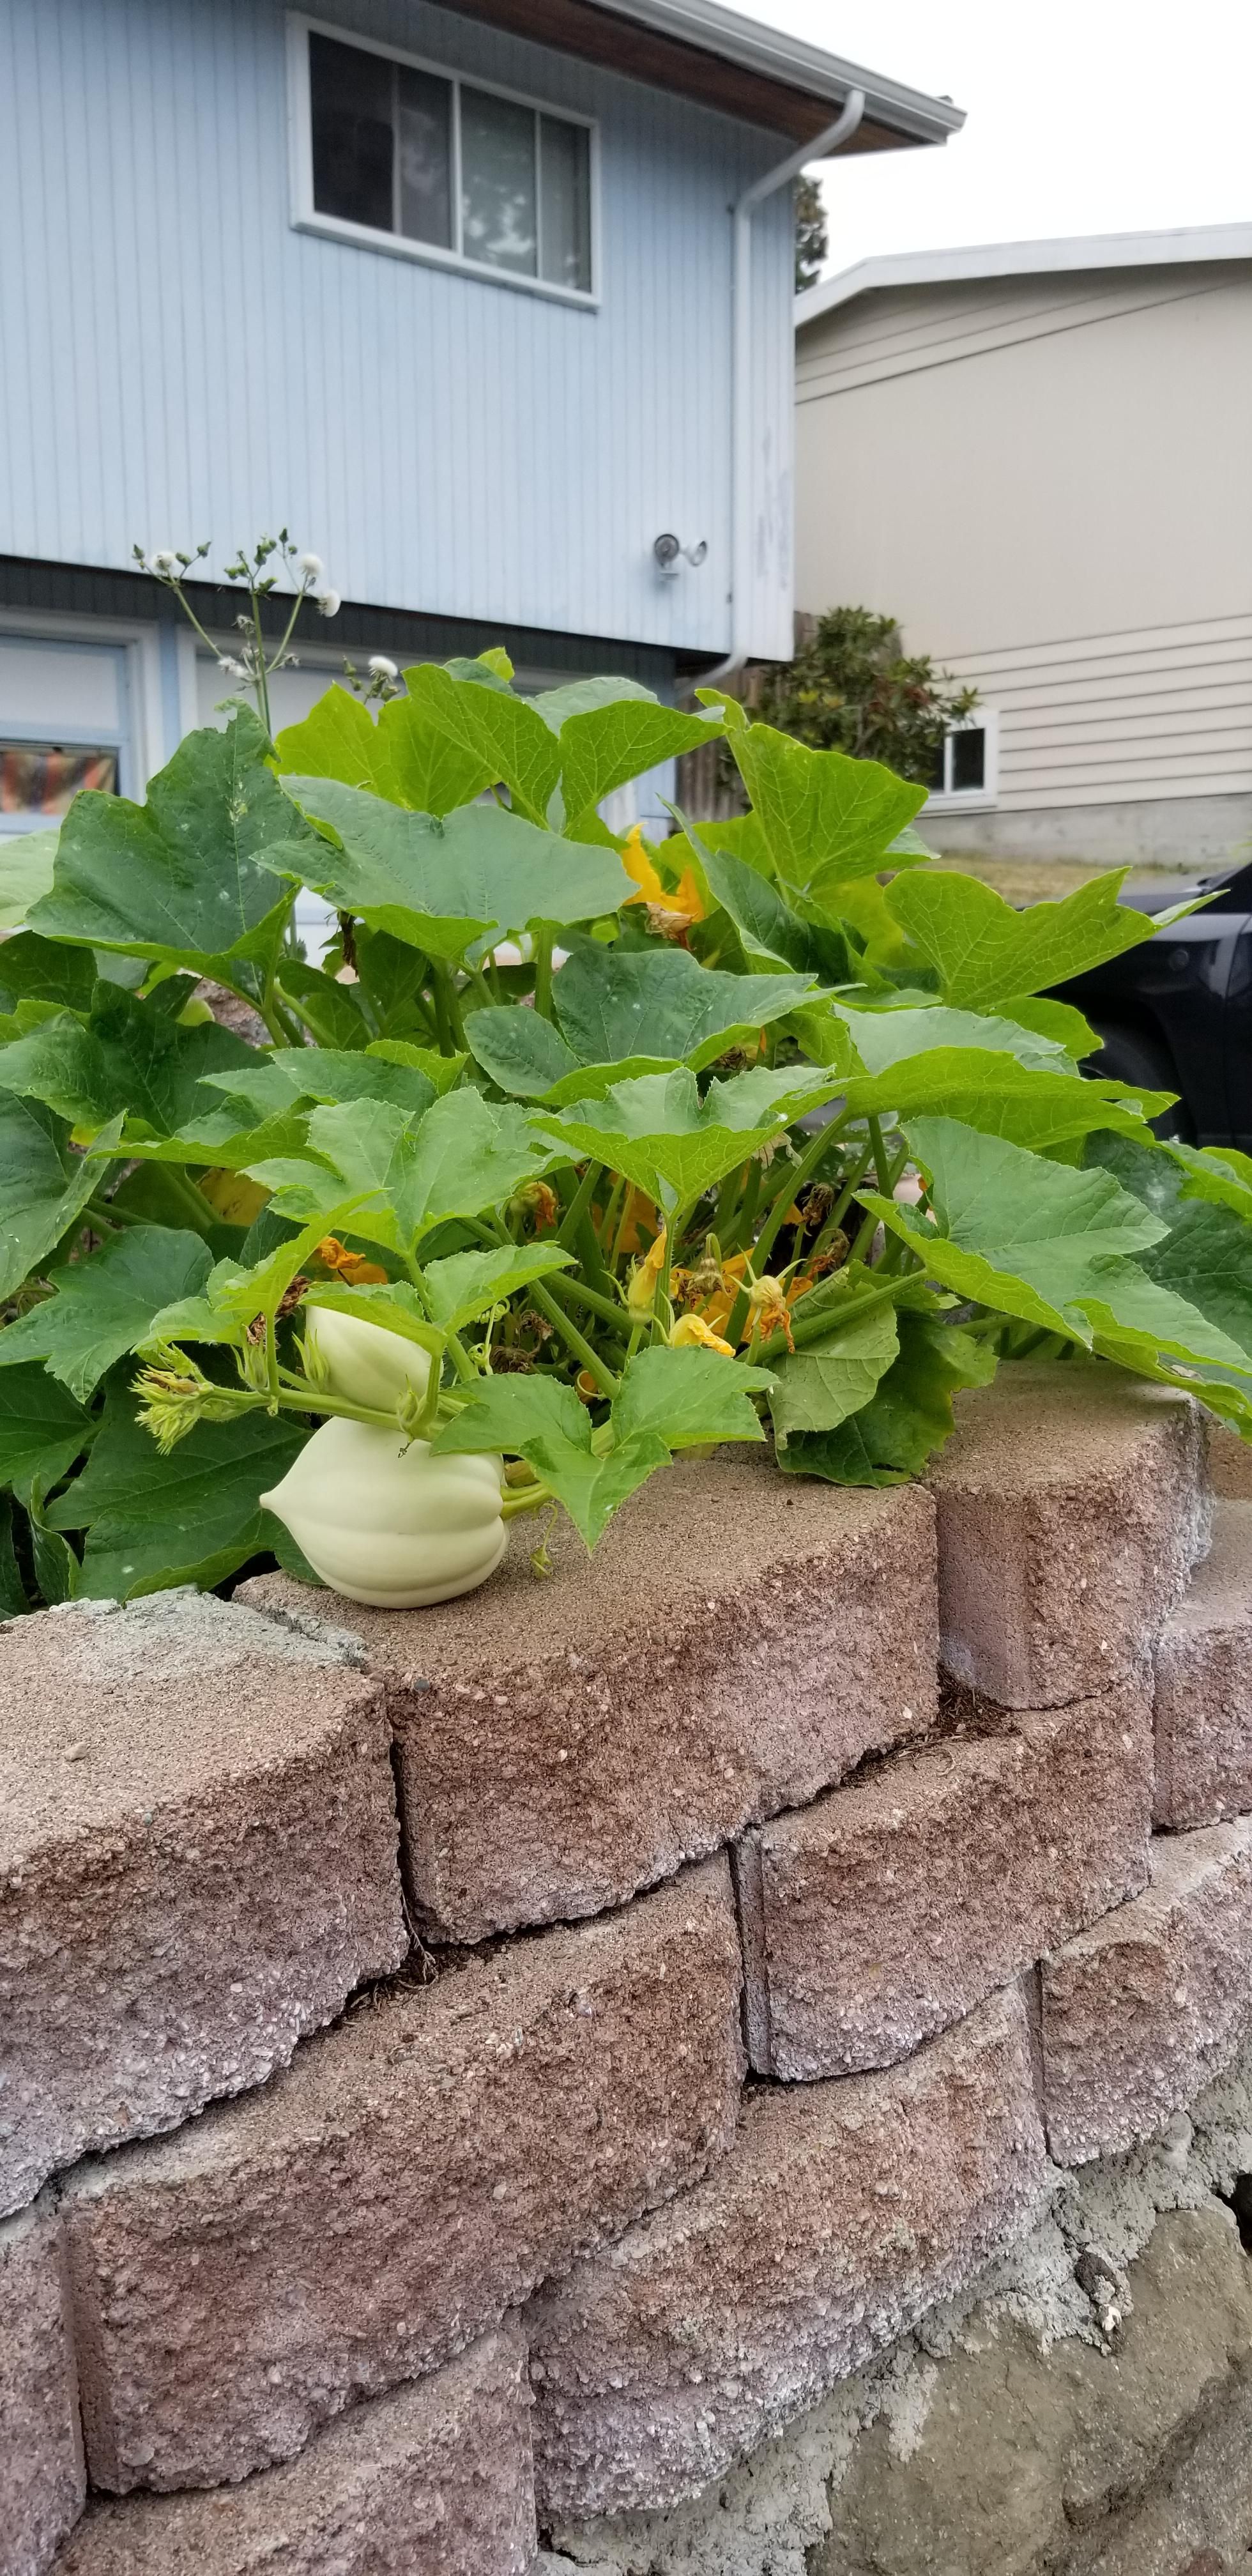 Last year my roommate threw a rotting pumpkin in the yard. This year we have a pumpkin patch.